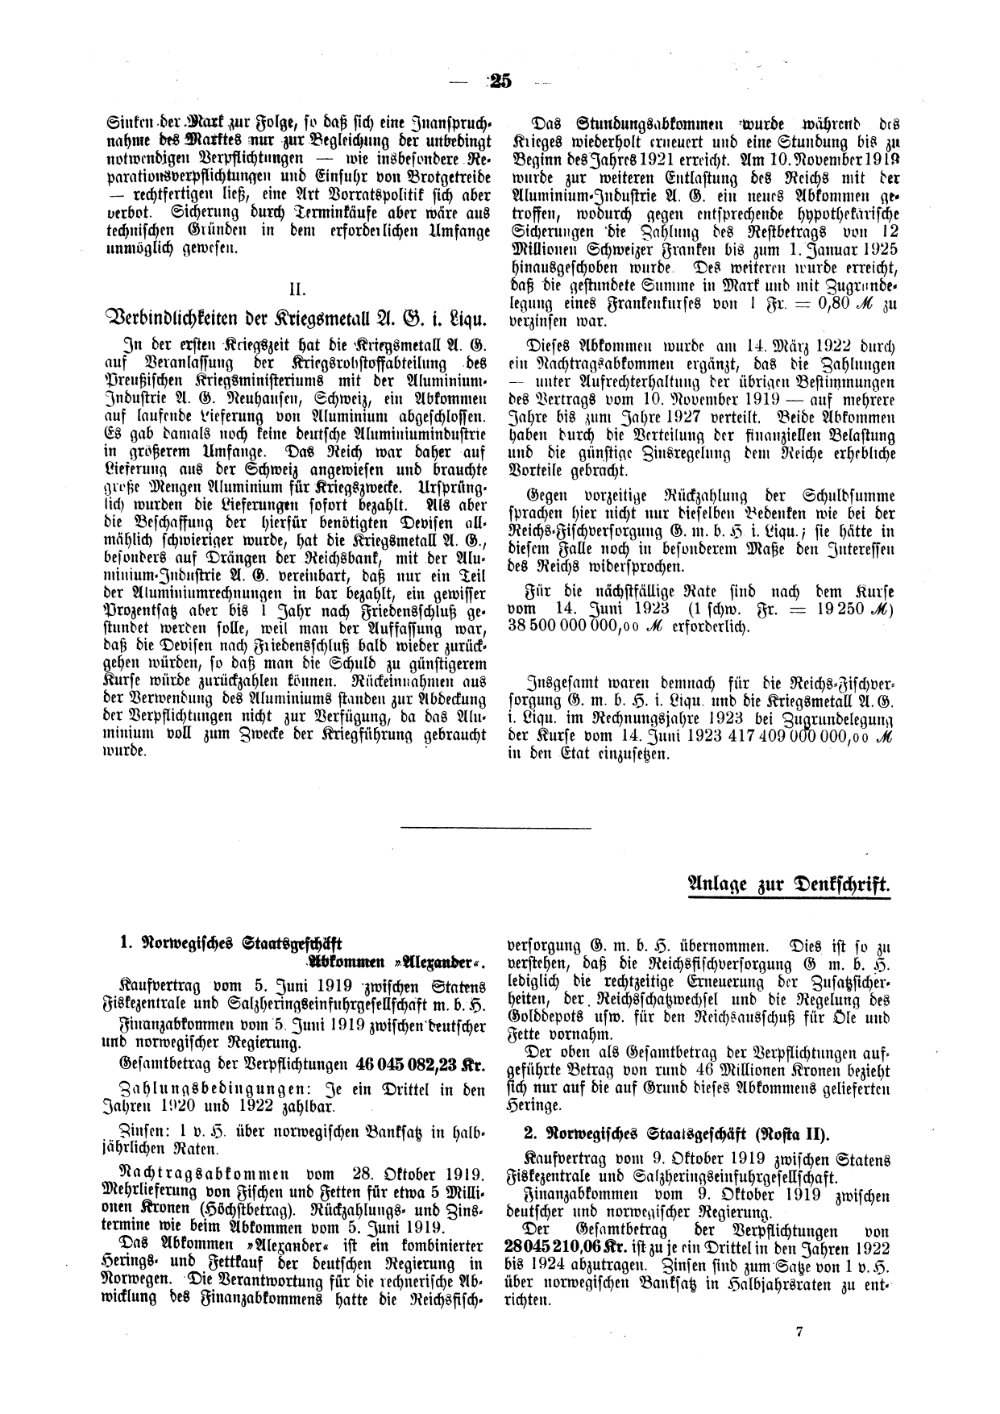 Scan of page 25